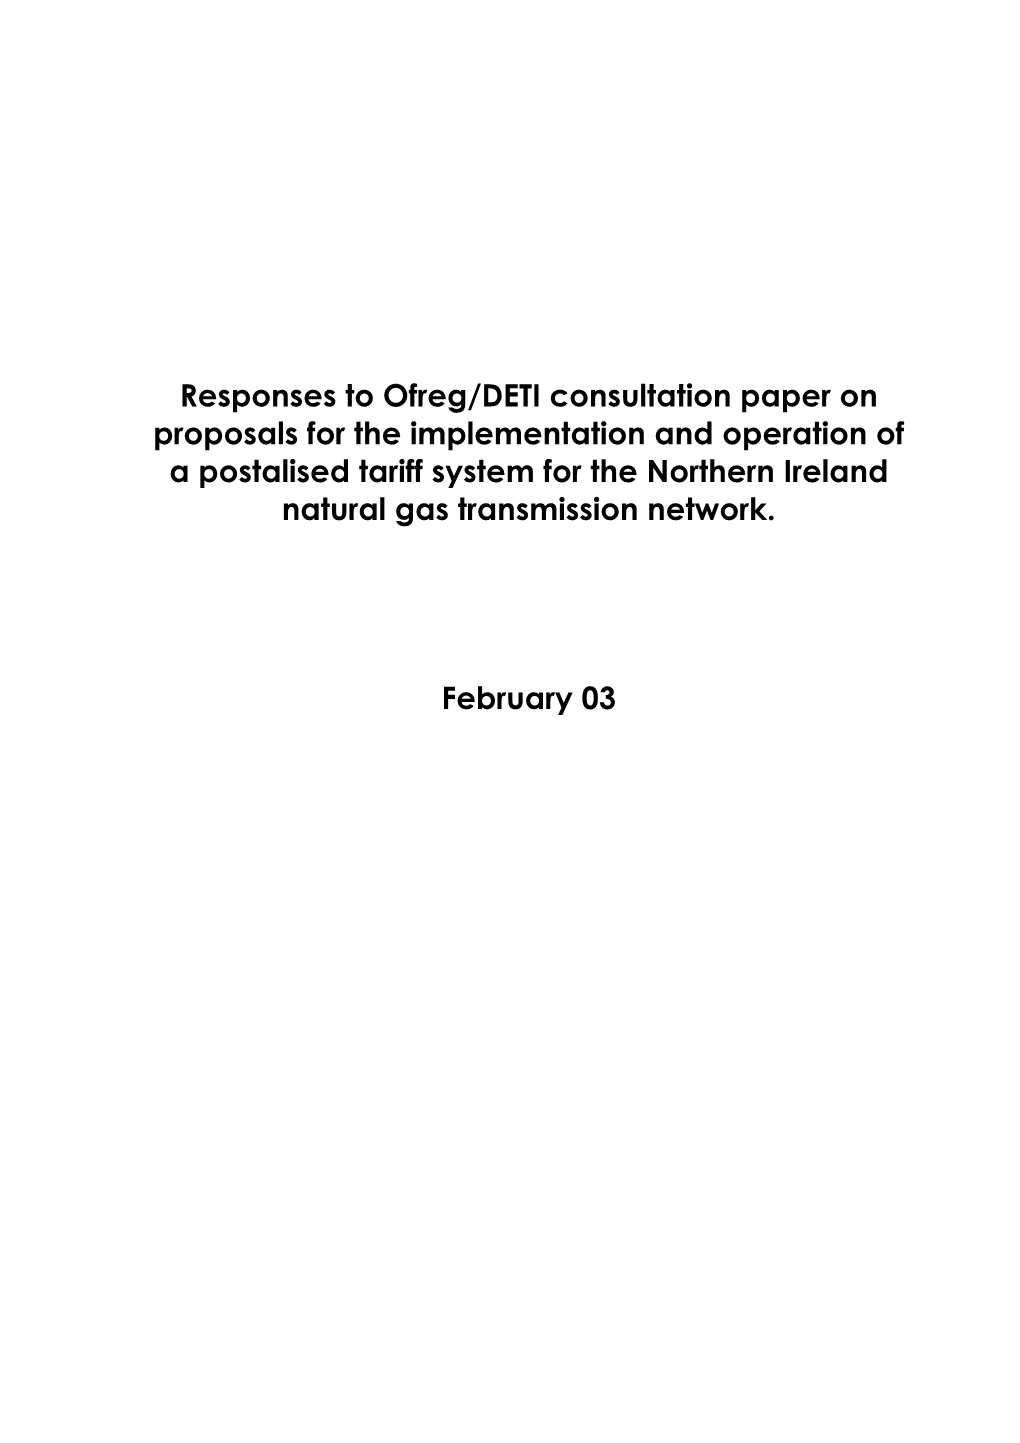 Responses to Ofreg/DETI Consultation Paper on Proposals for the Implementation and Operation of a Postalised Tariff System for T